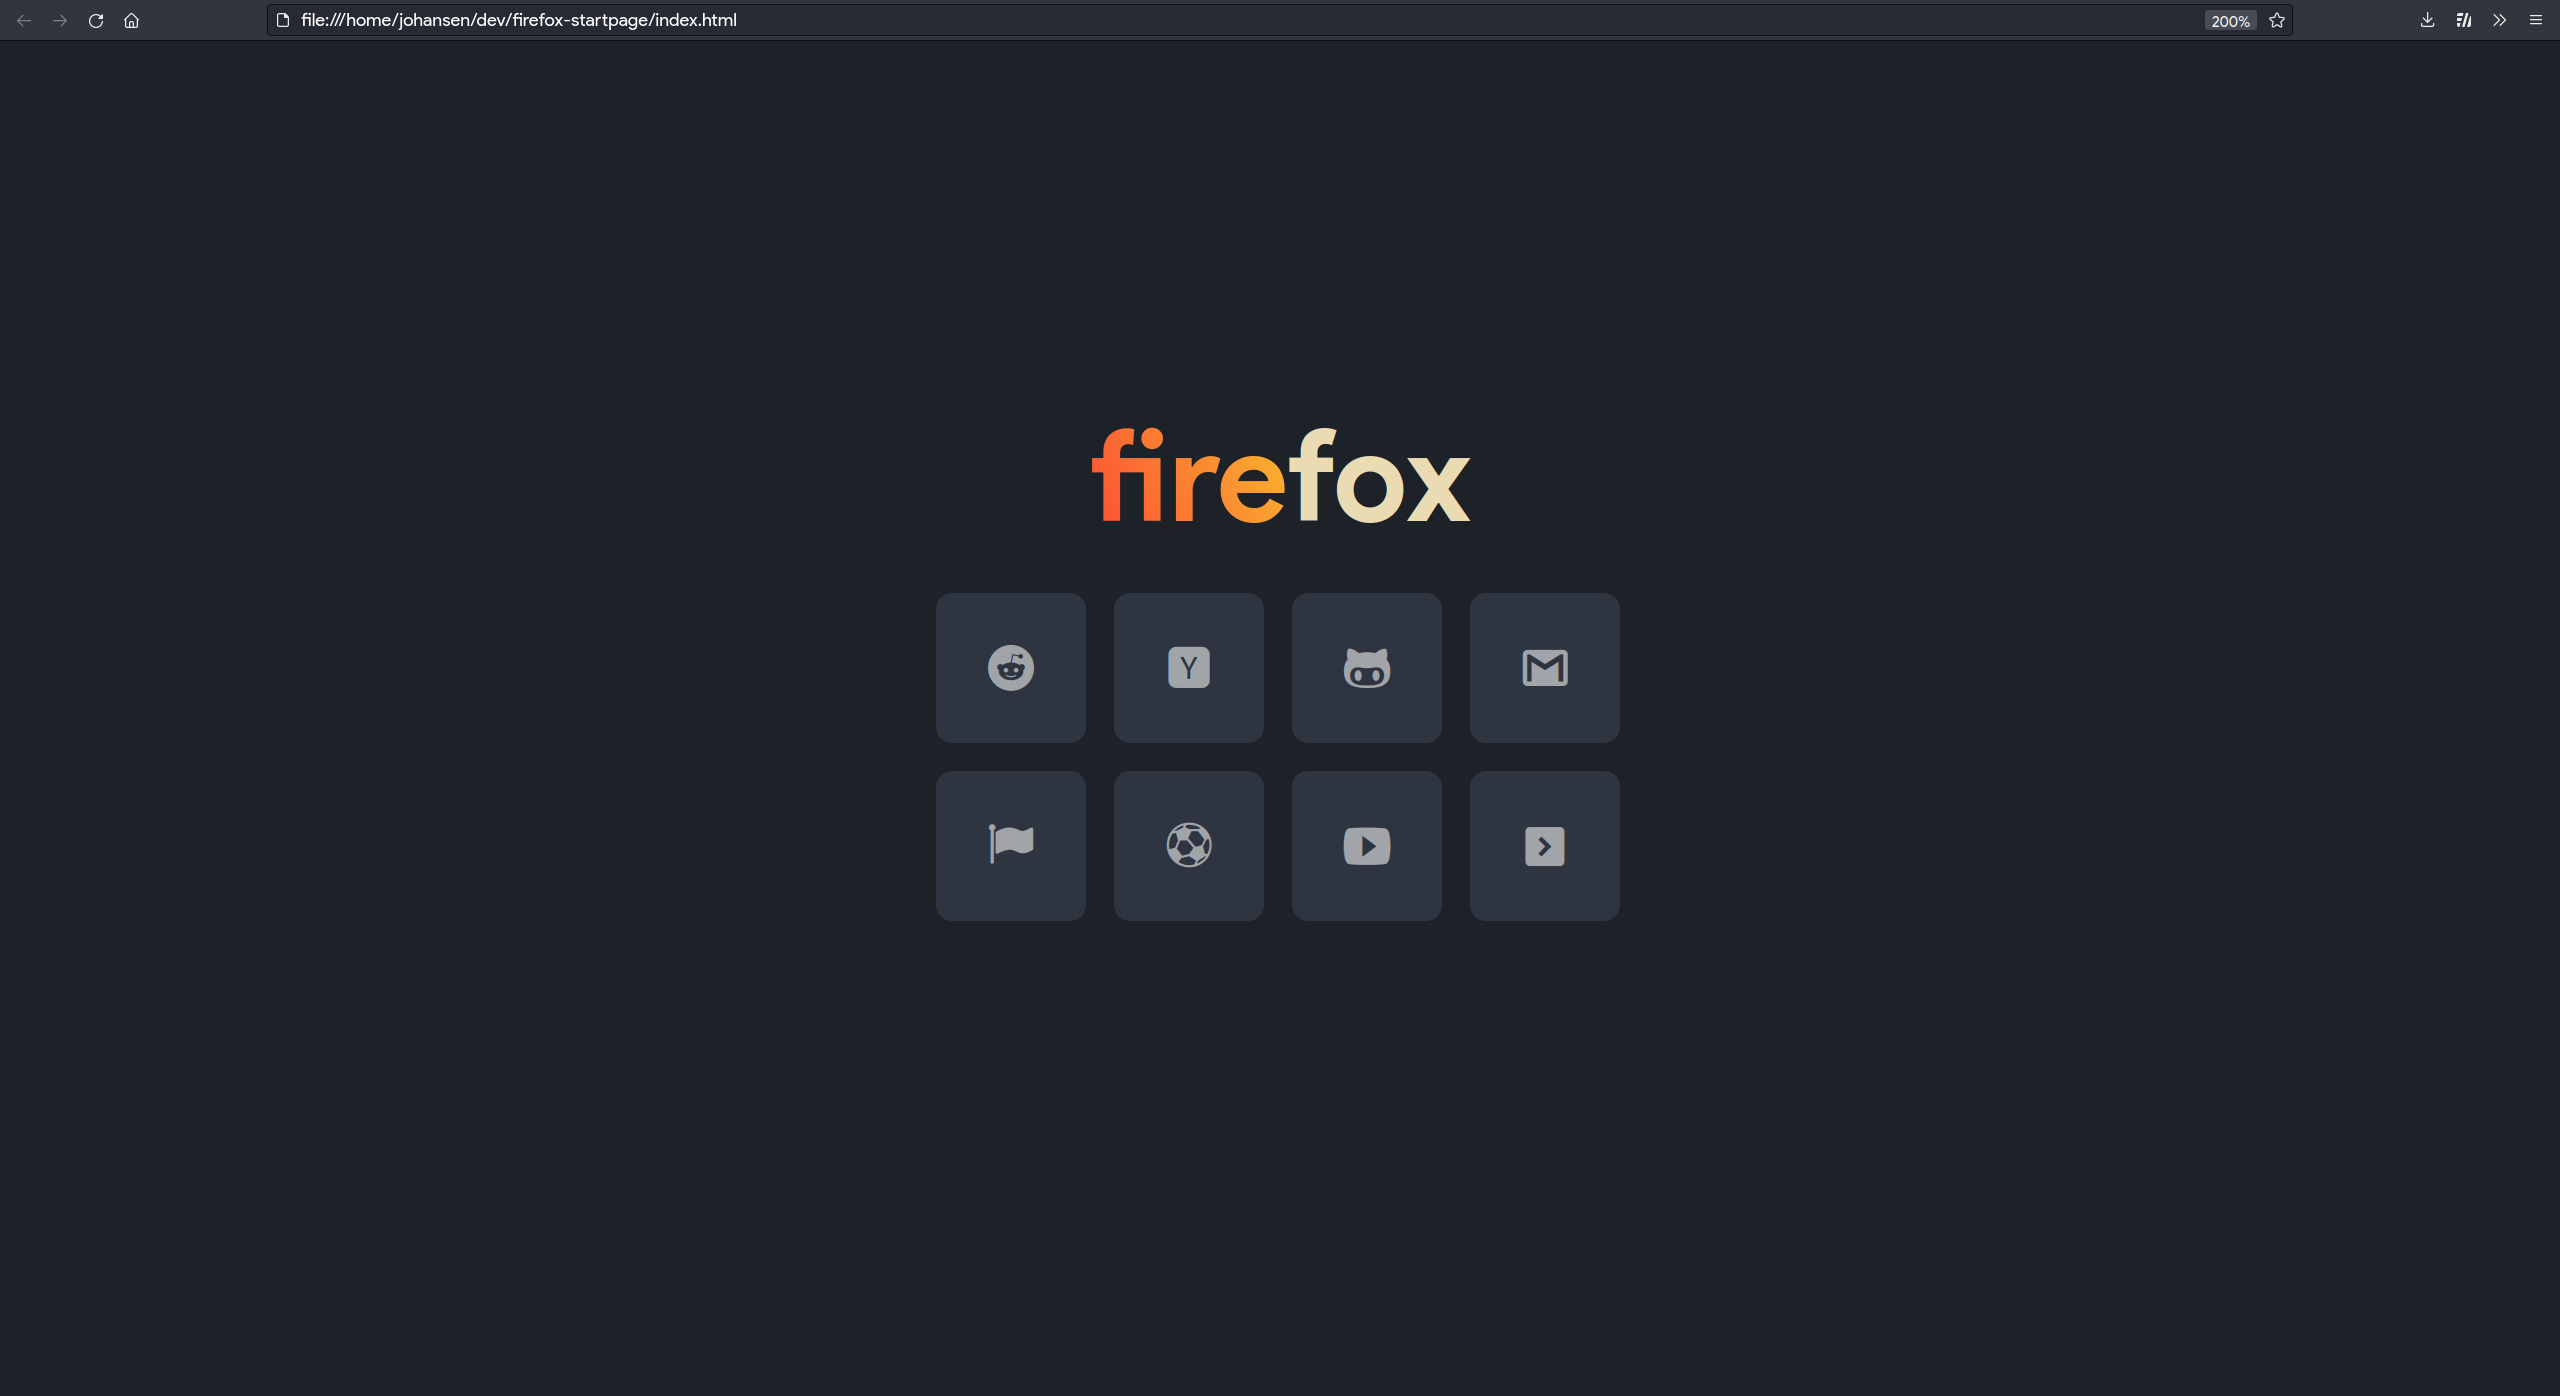 A screenshot of the minimal startpage in Firefox